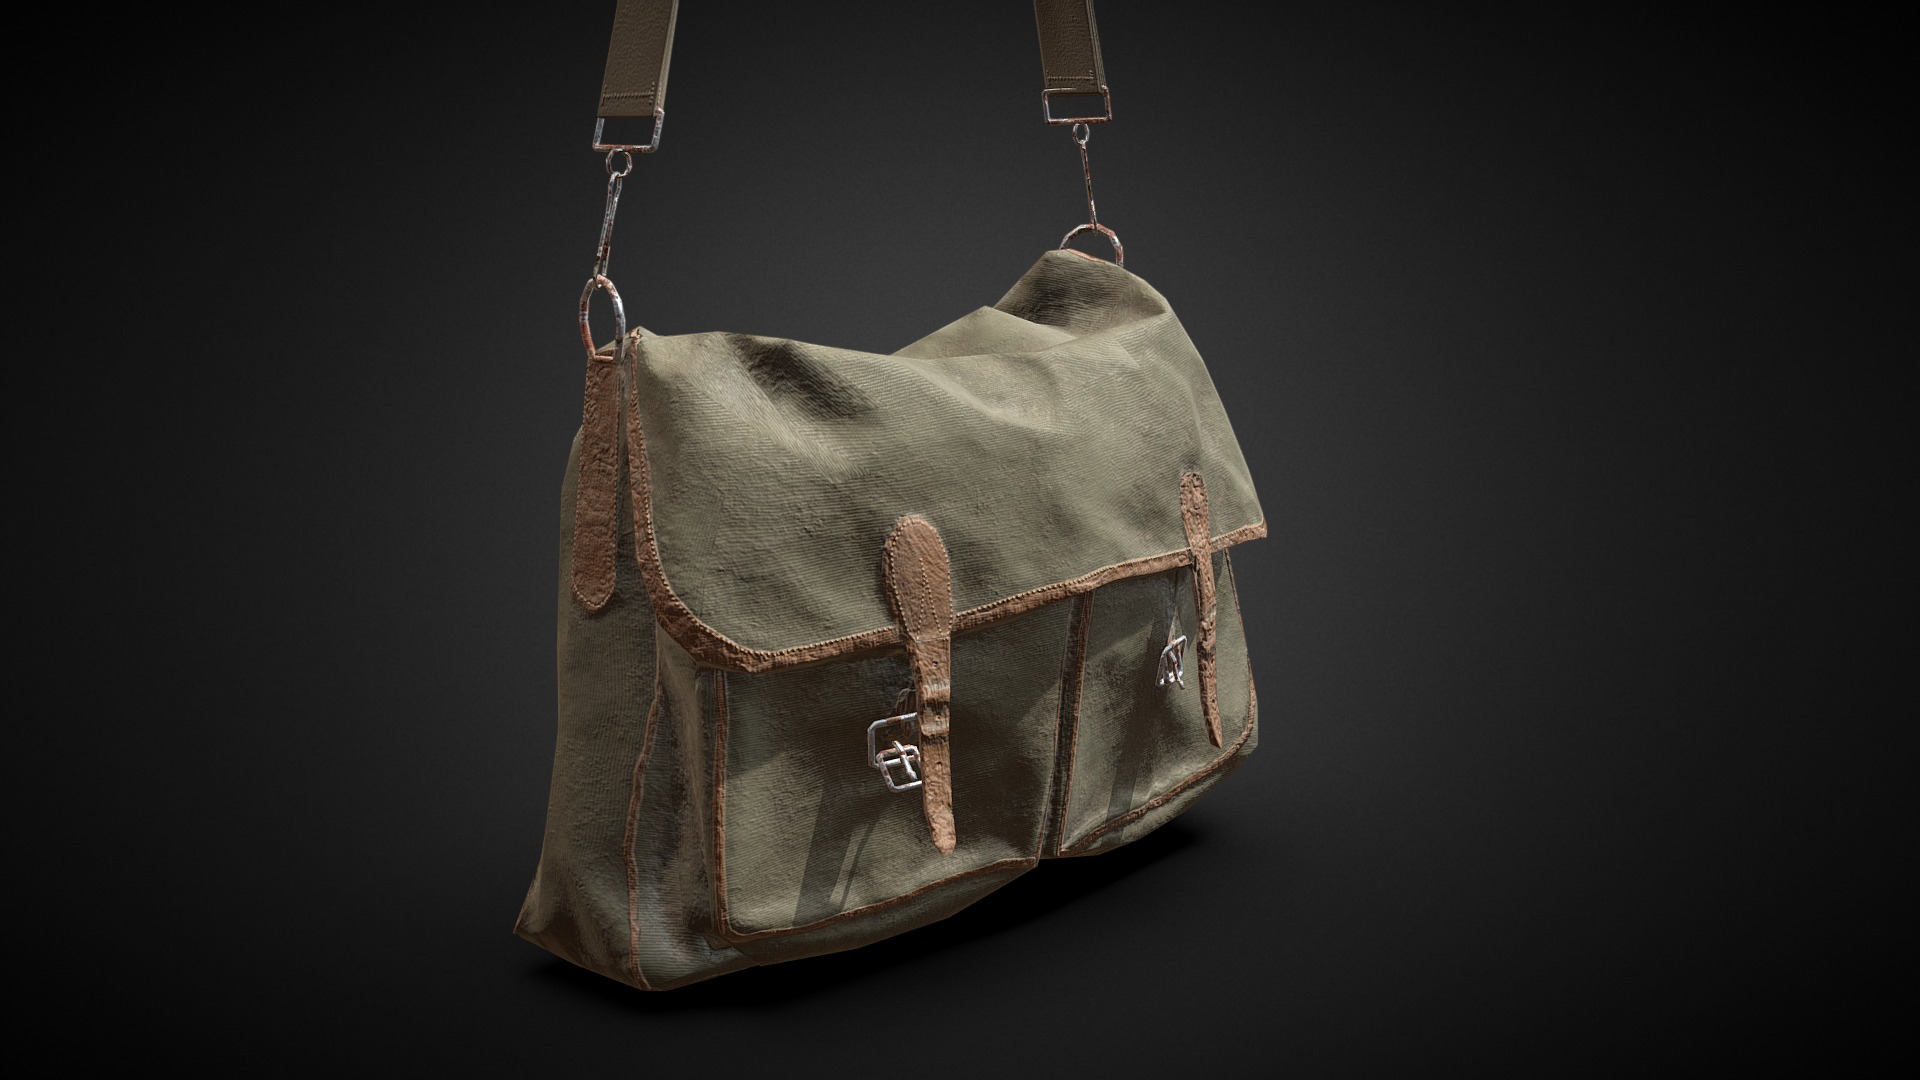 3D model Old mail bag - This is a 3D model of the Old mail bag. The 3D model is about a brown bag with a strap.